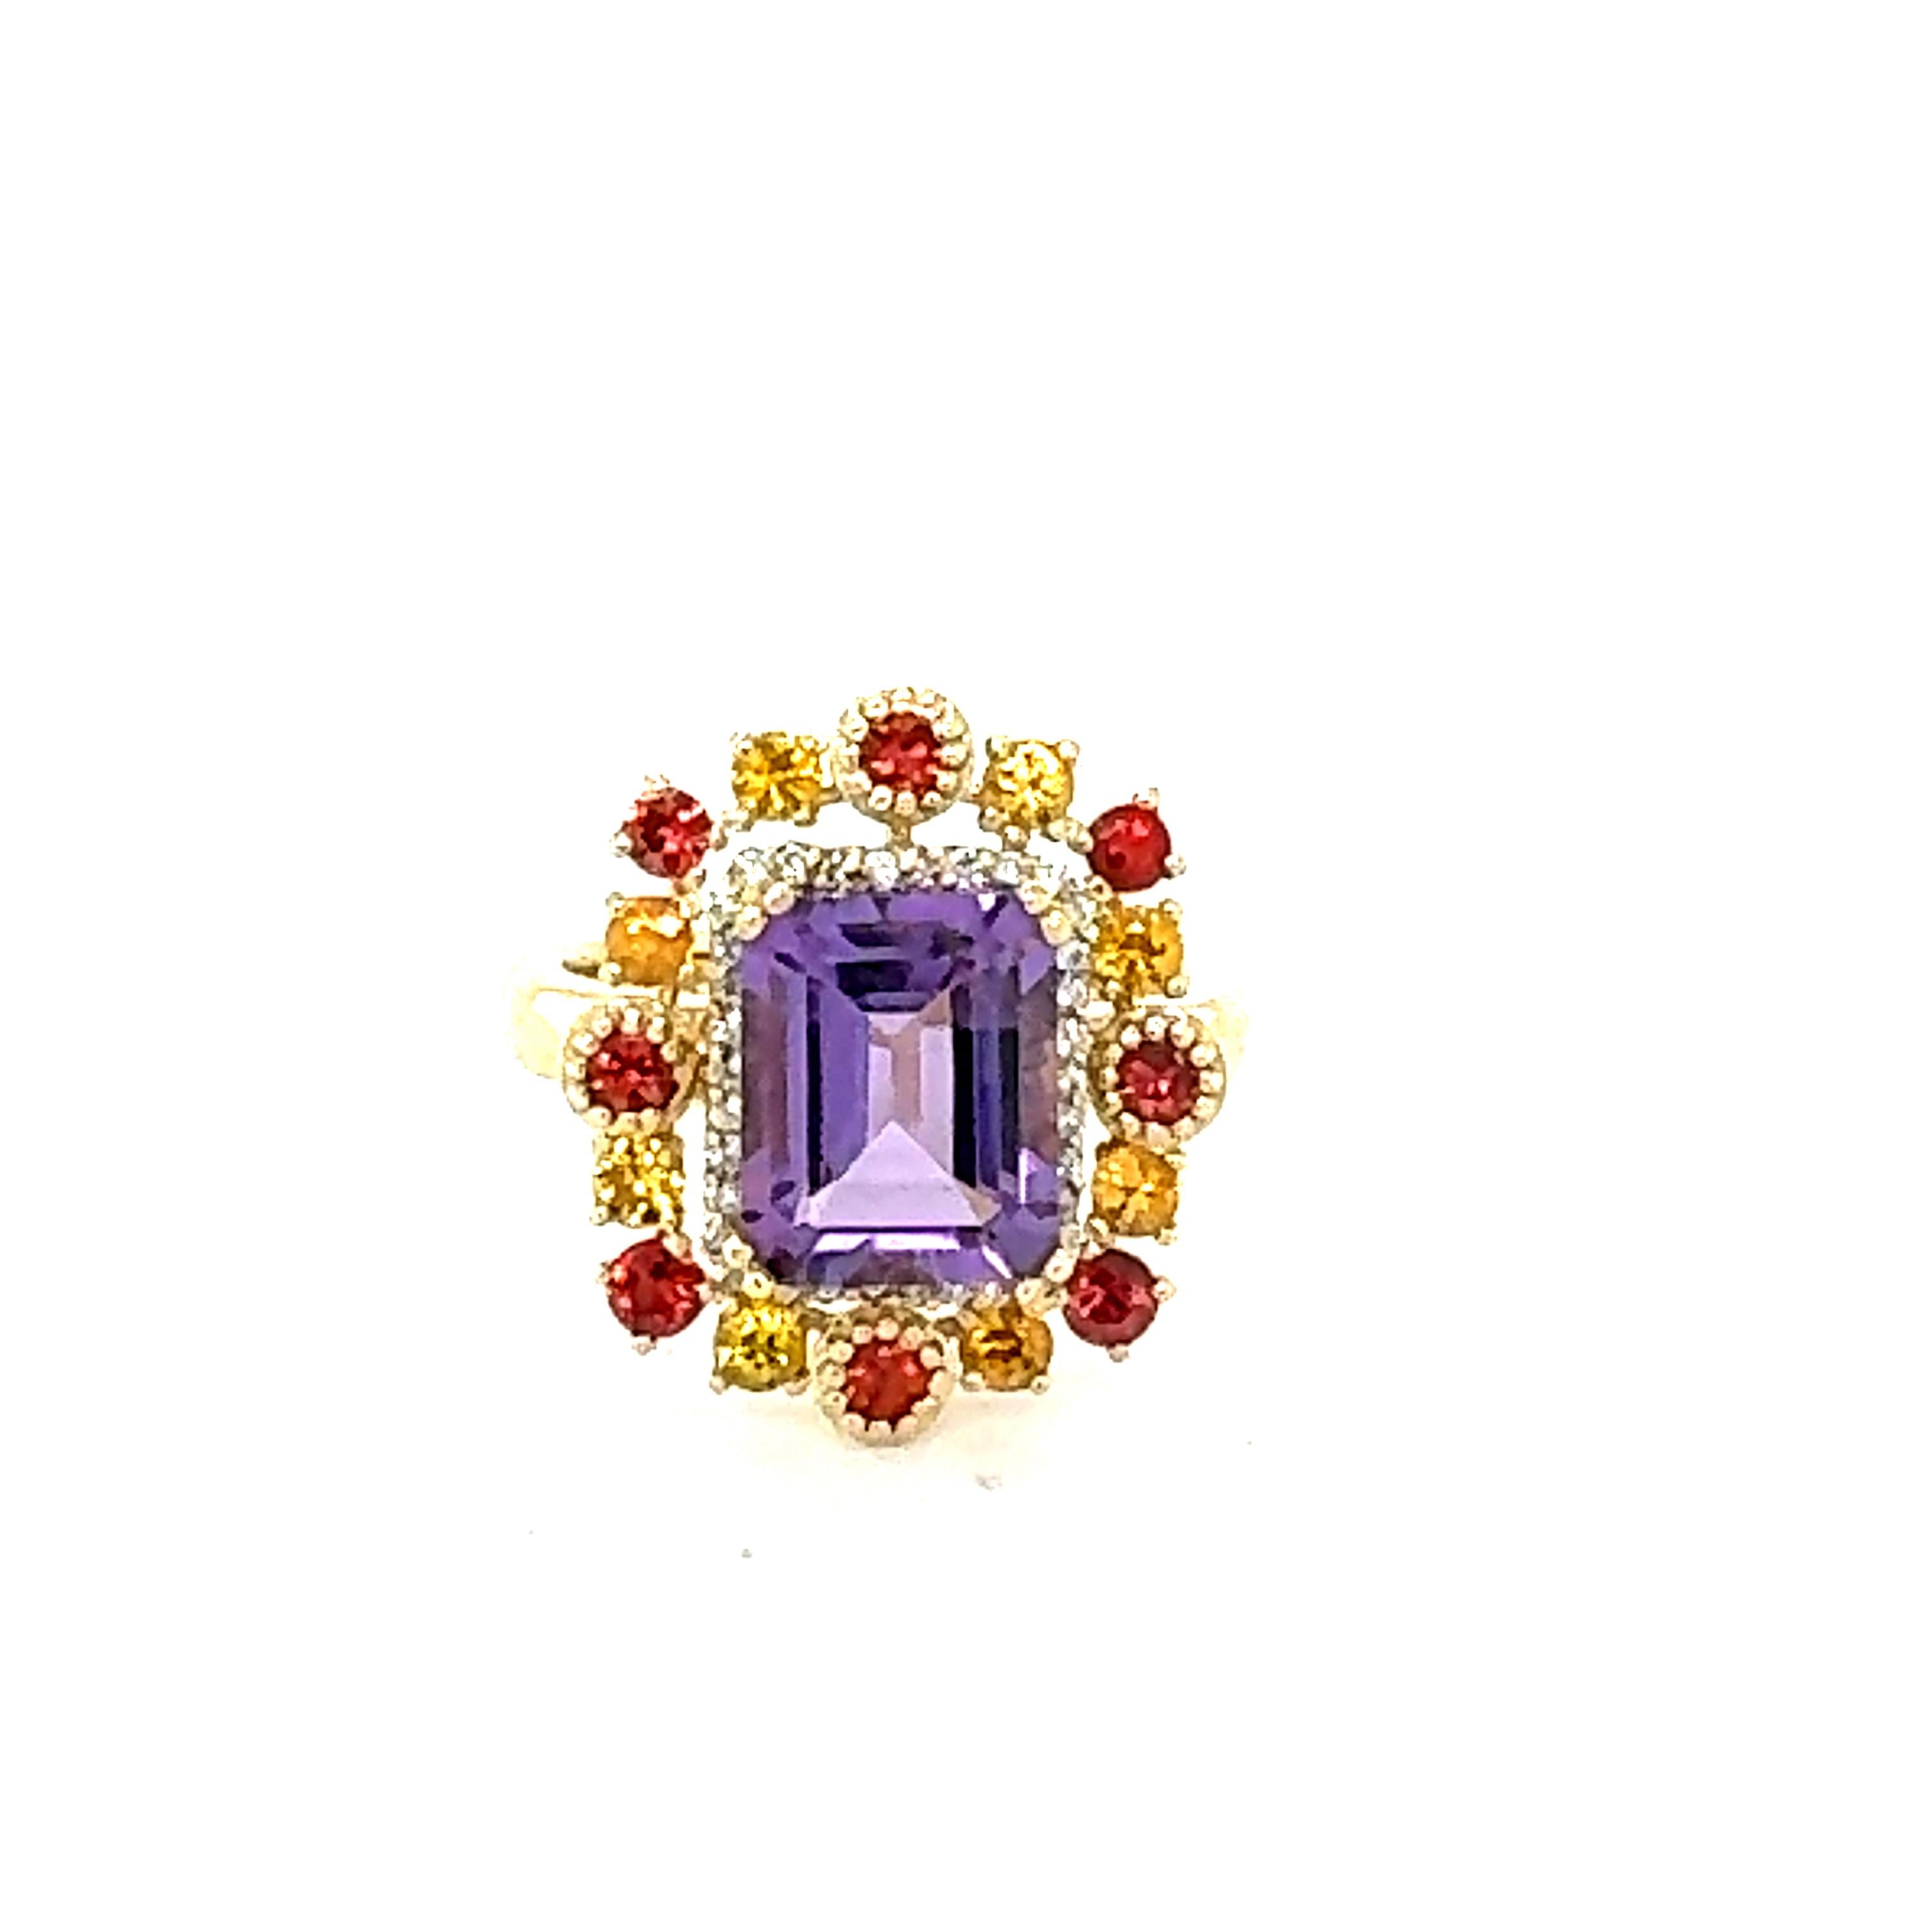 4.31 Carat Natural Amethyst Diamond Sapphire Yellow Gold Cocktail Ring

Or it can be a gorgeous and uniquely designed engagement ring alternative for a fraction of the price.  

This ring has a bright and vivid purple Emerald Cut Amethyst that